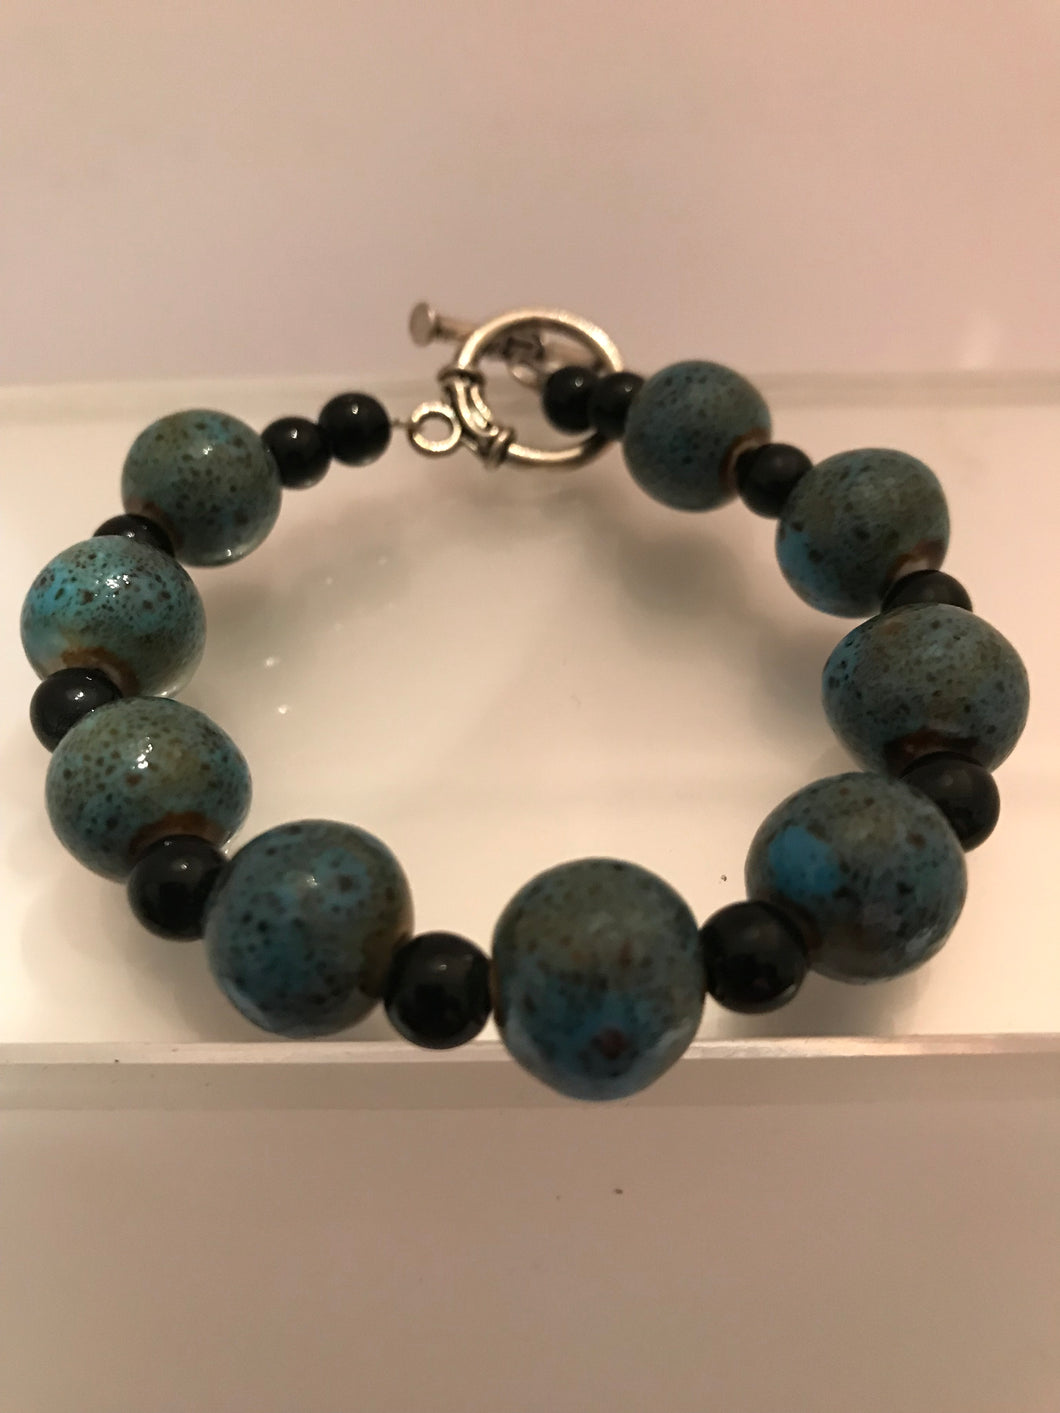 Dark green/blue stone beads with black accent spacers.